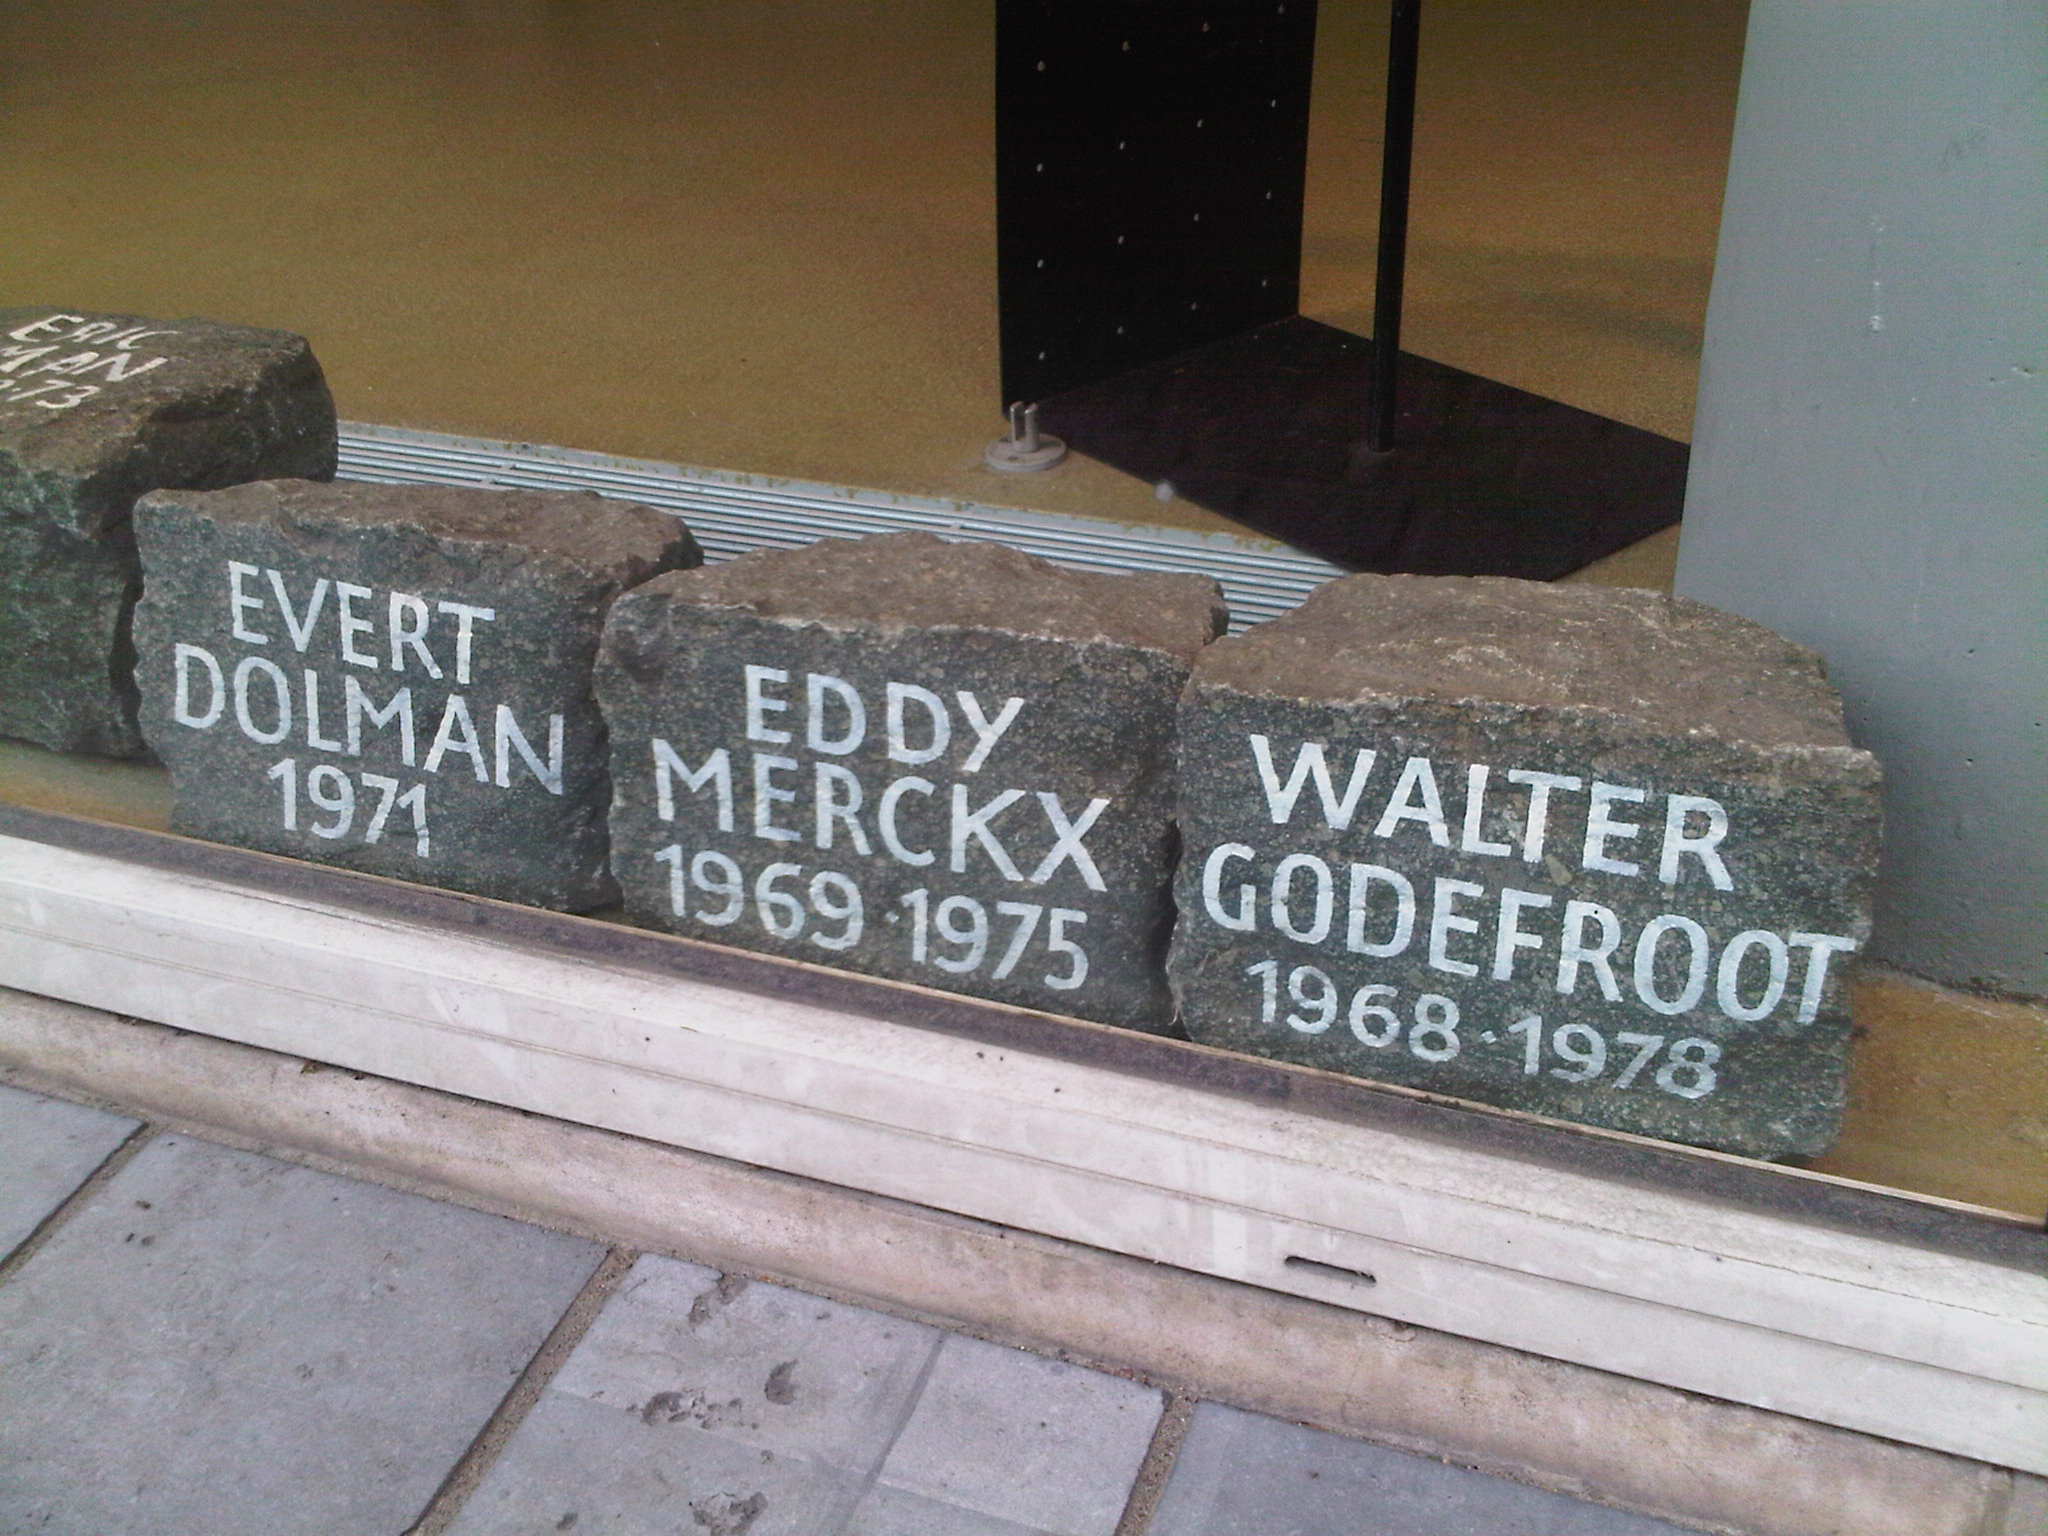 Winner's stones from the Tour of Flanders.